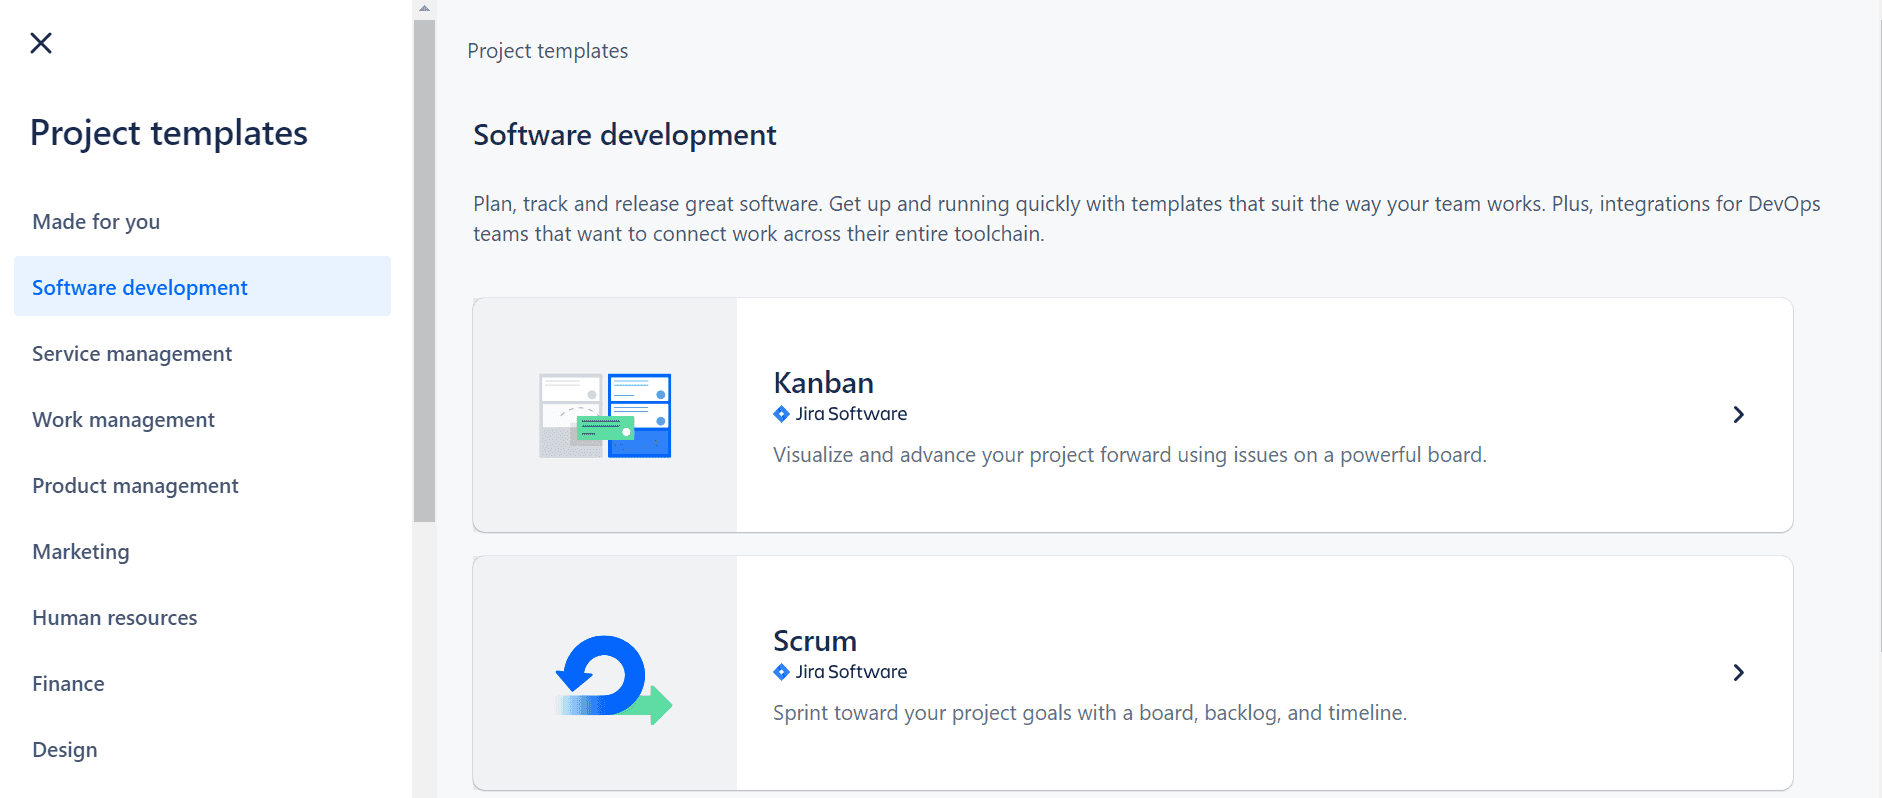 Jira Scrum or Kanban project template from Software development can be integrated with ReqView